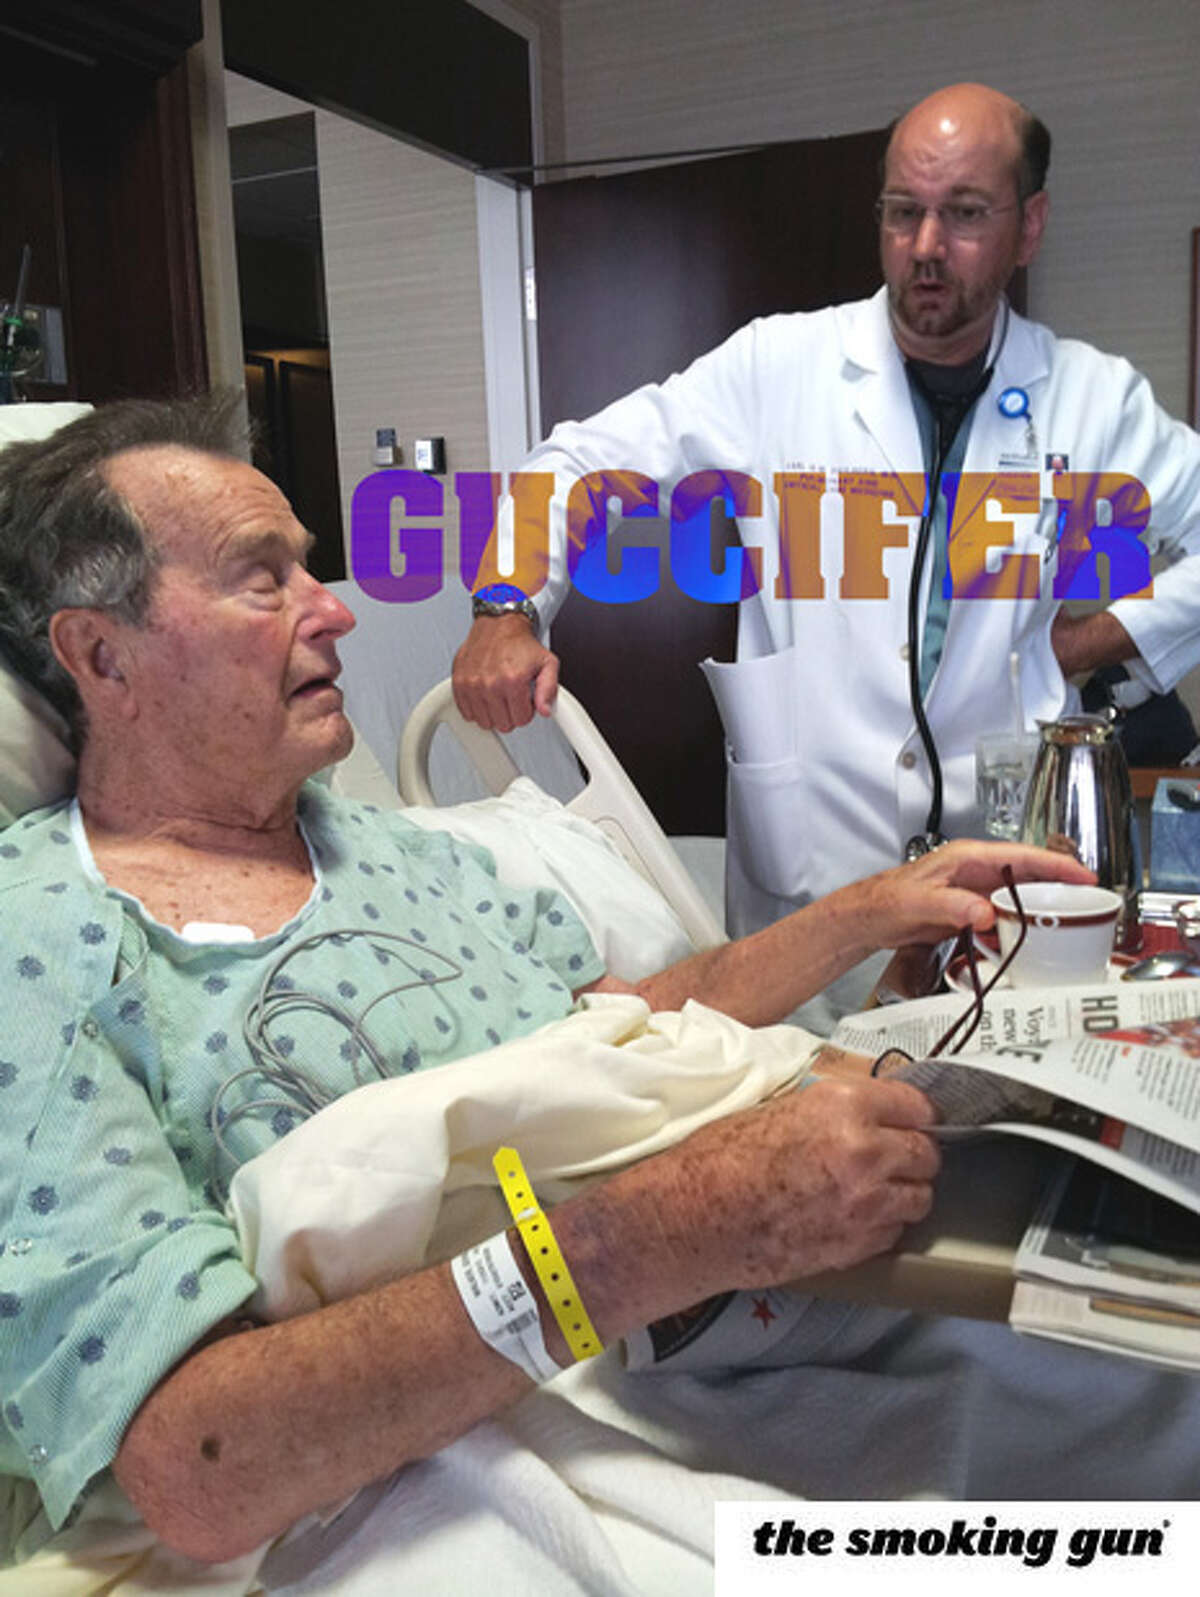 A photo published on The Smoking Gun's website shows President George H.W. Bush in a hospital. The website published this and other photos tagged with the hacker's online alias, "Guccifer." See them here.